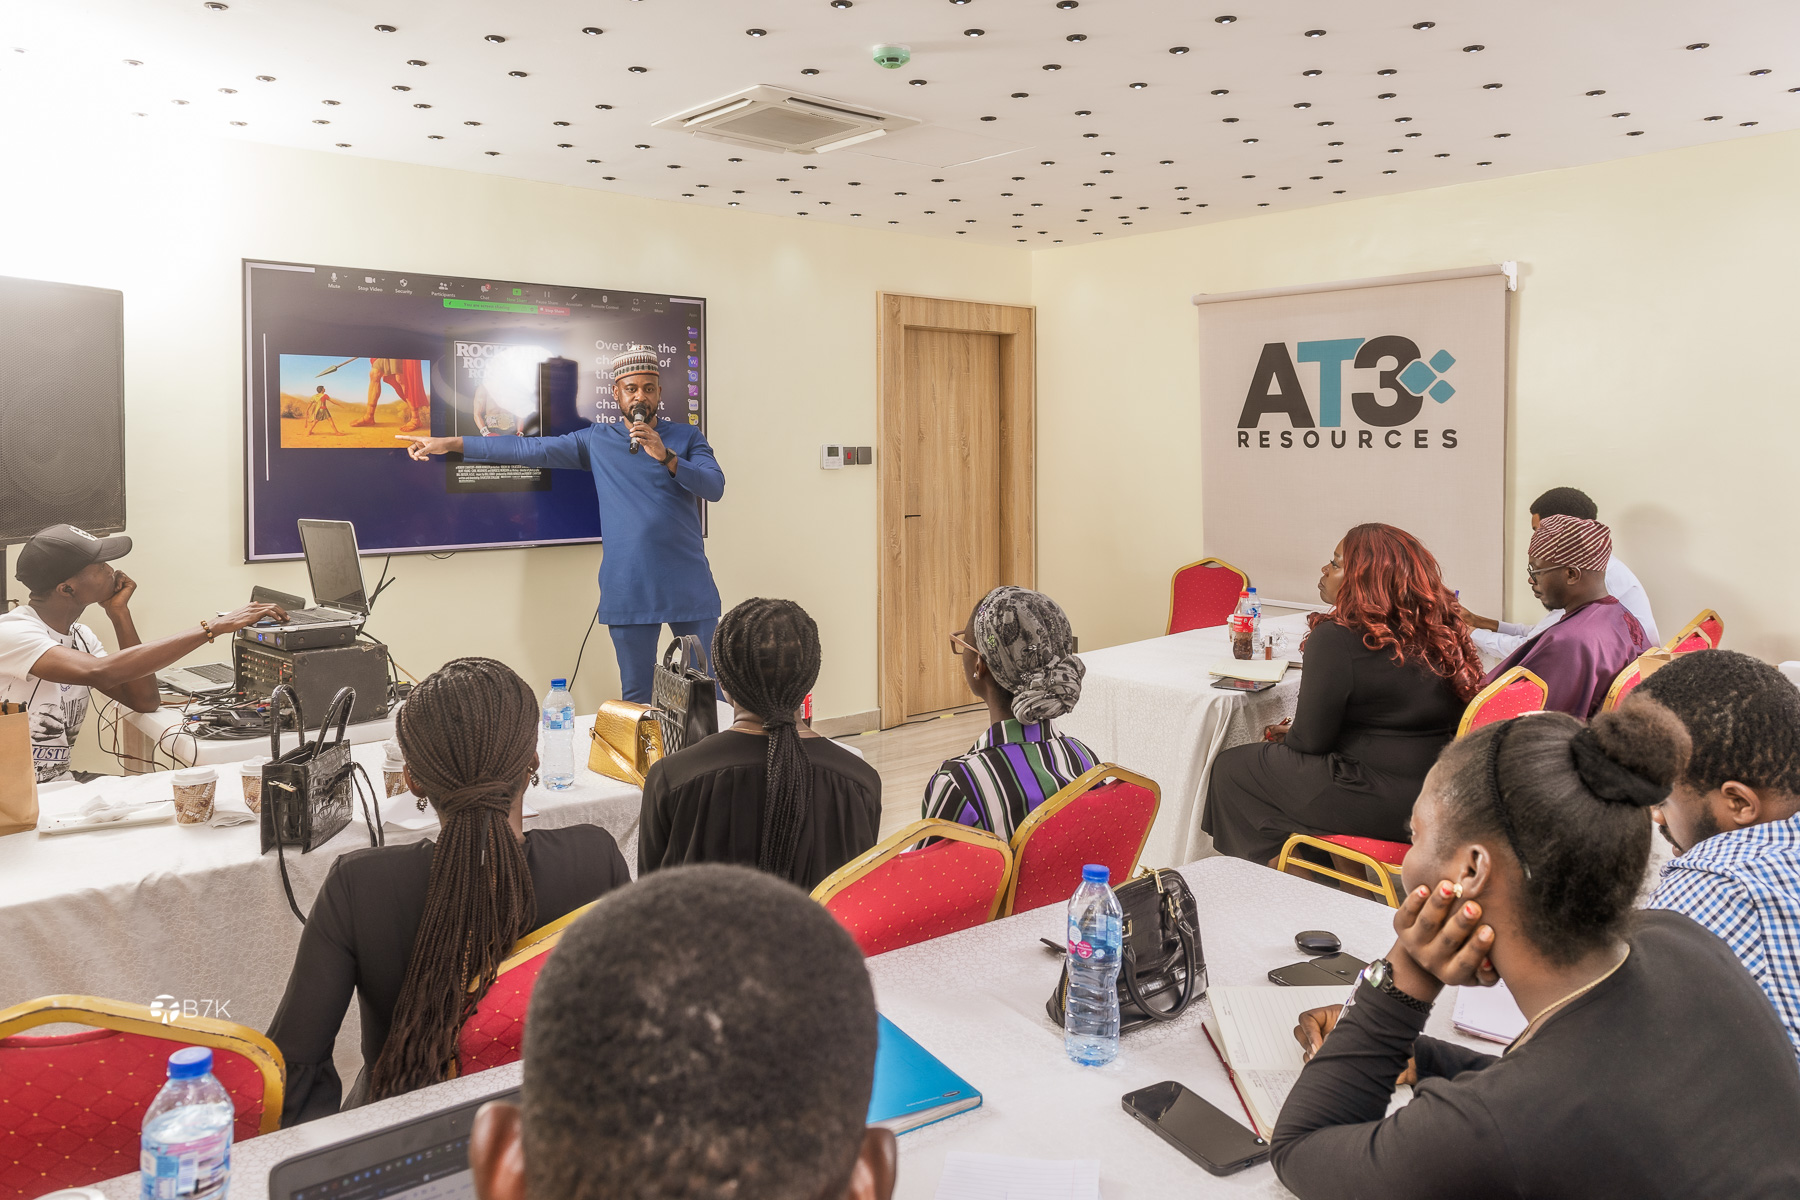 Idu Raphael CEO Poke Ltd during his session on Benefits of storytelling to build a business online at the AT3 Resources Digital Marketing Bootcamp for SMEs organised